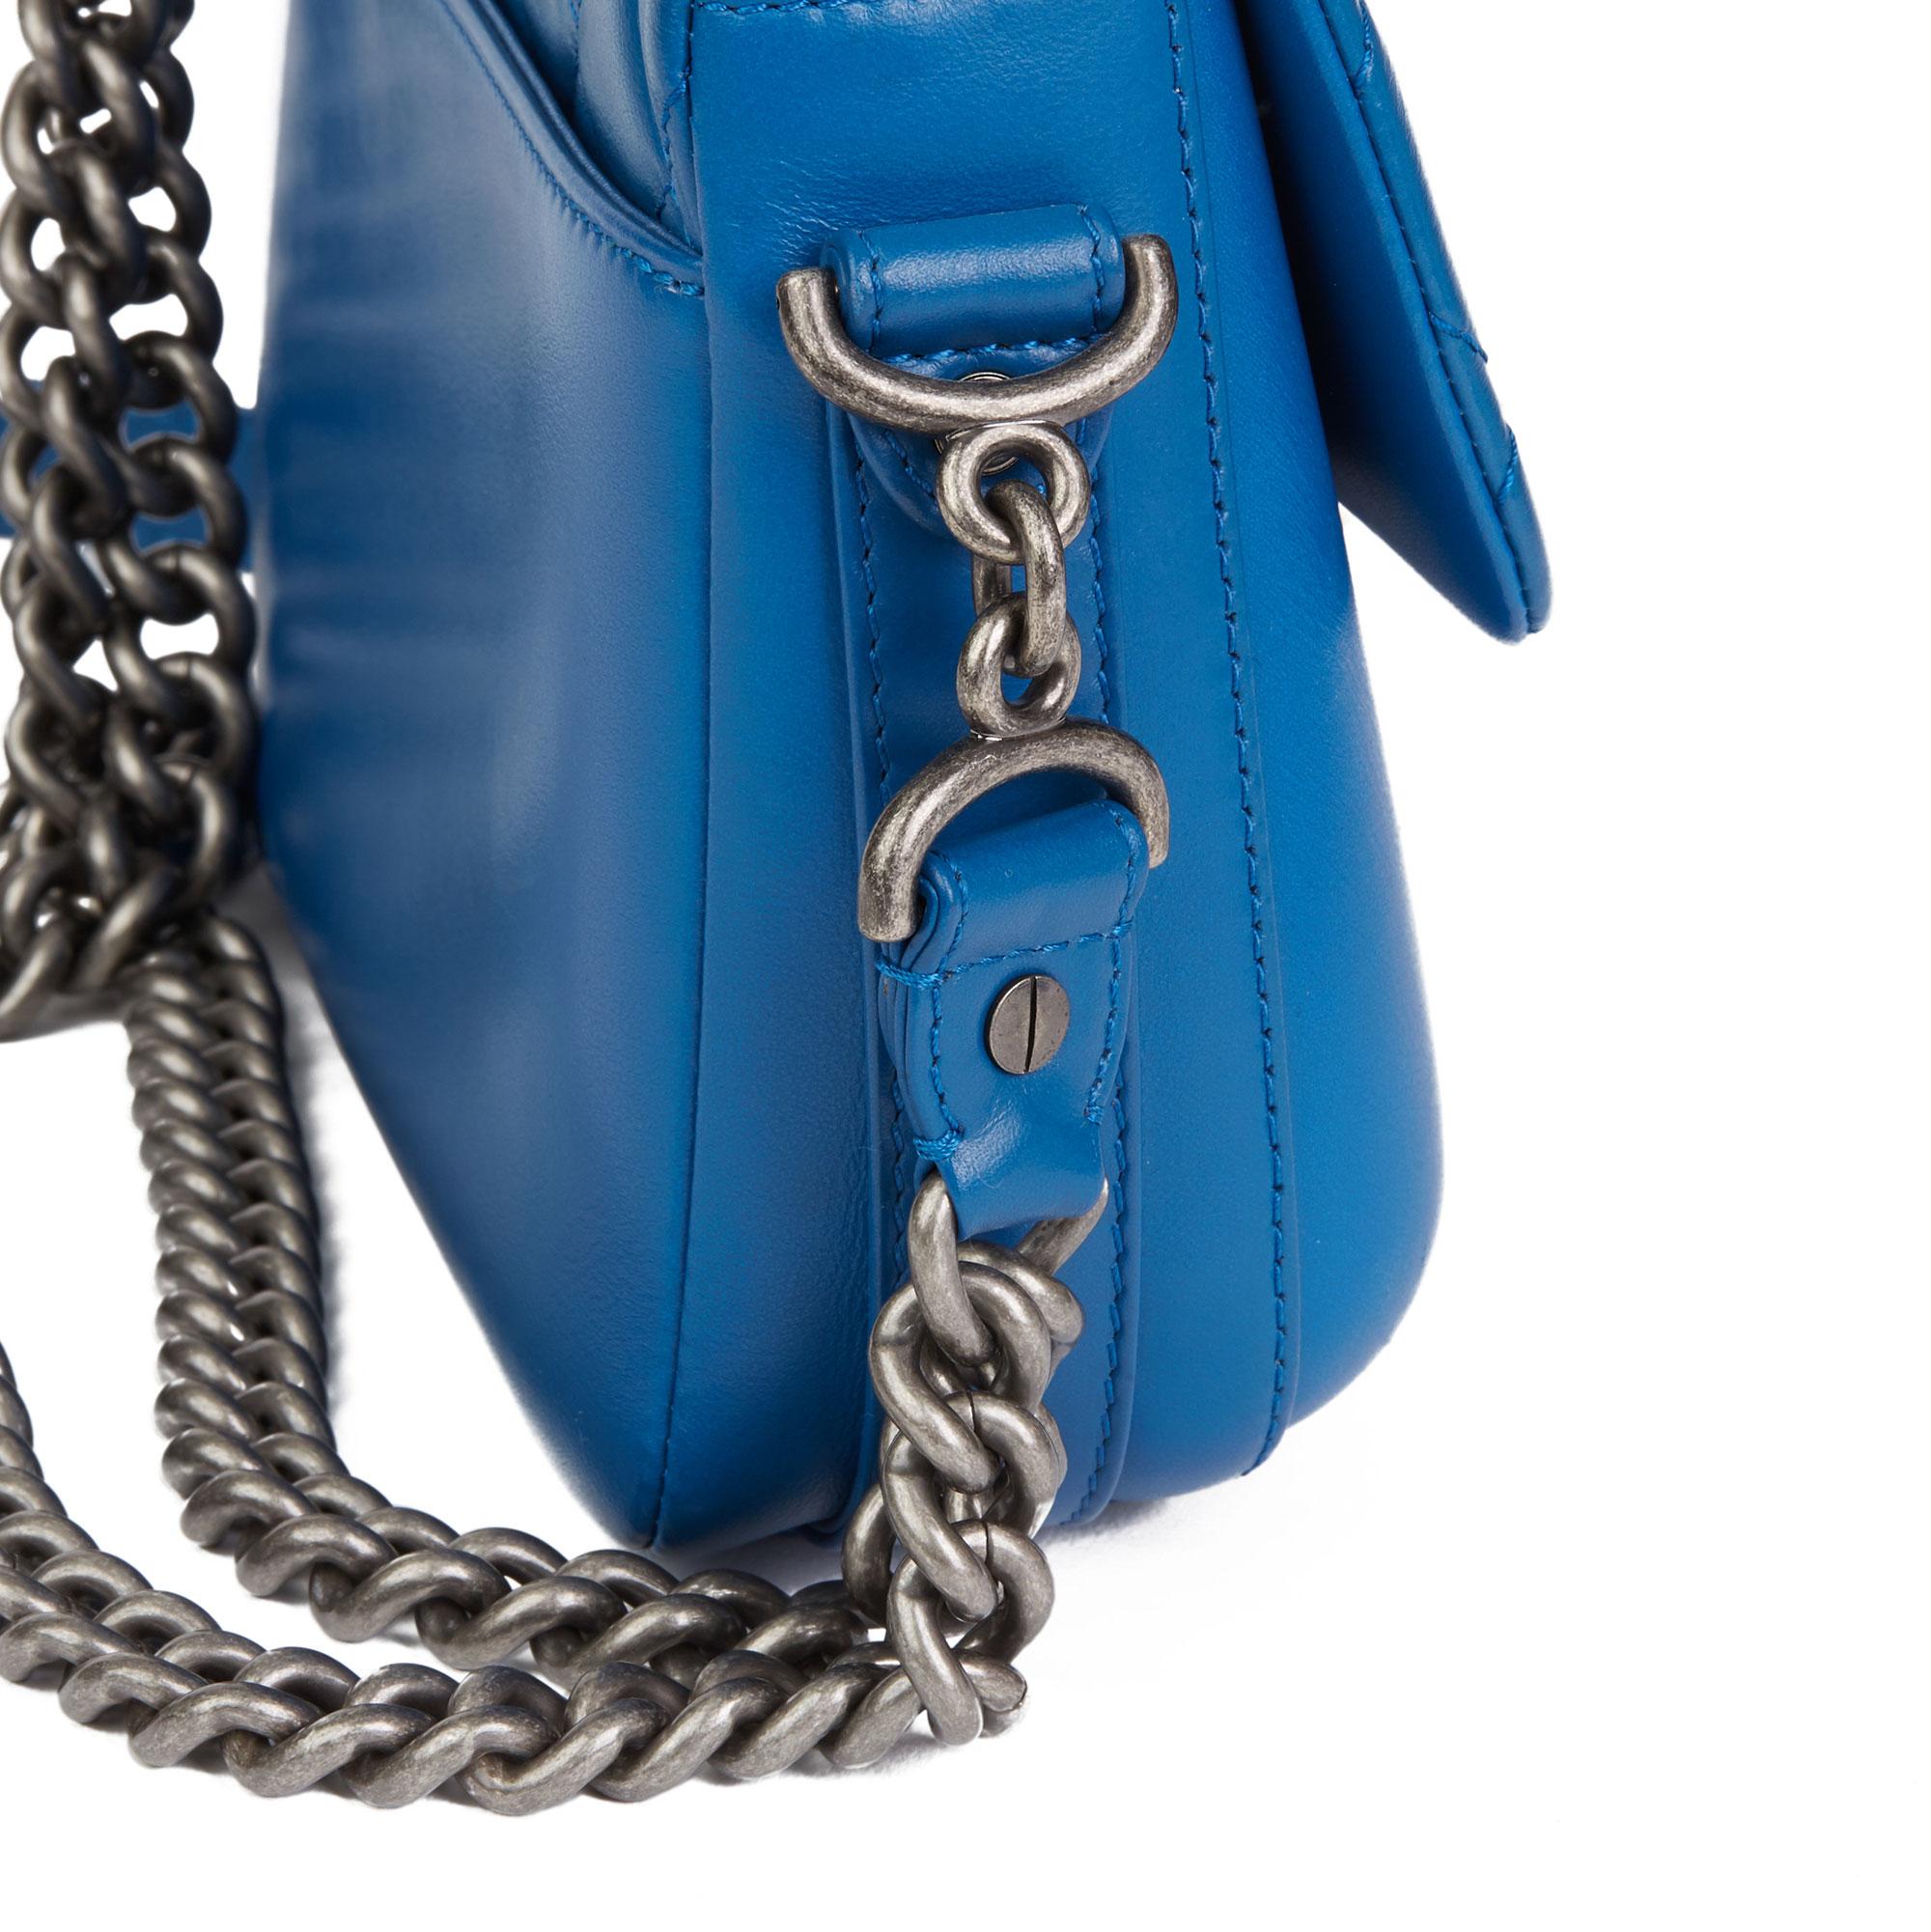 2018 Chanel Blue Quilted Calfskin Leather Classic Single Flap Bag  1